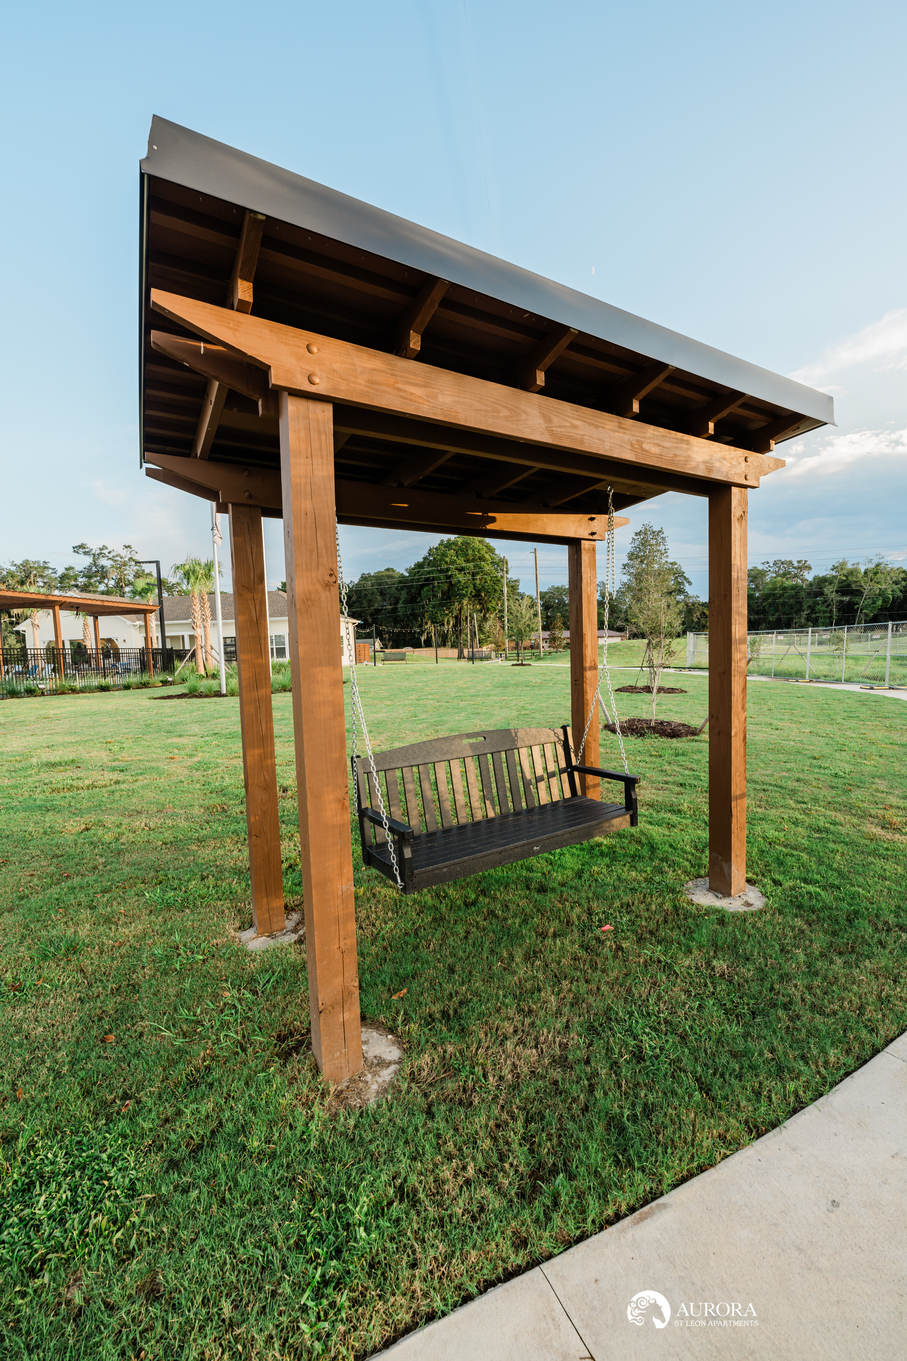 A wooden gazebo with a swing in the middle of a grassy area, managed by 42 Apartment Property Management.